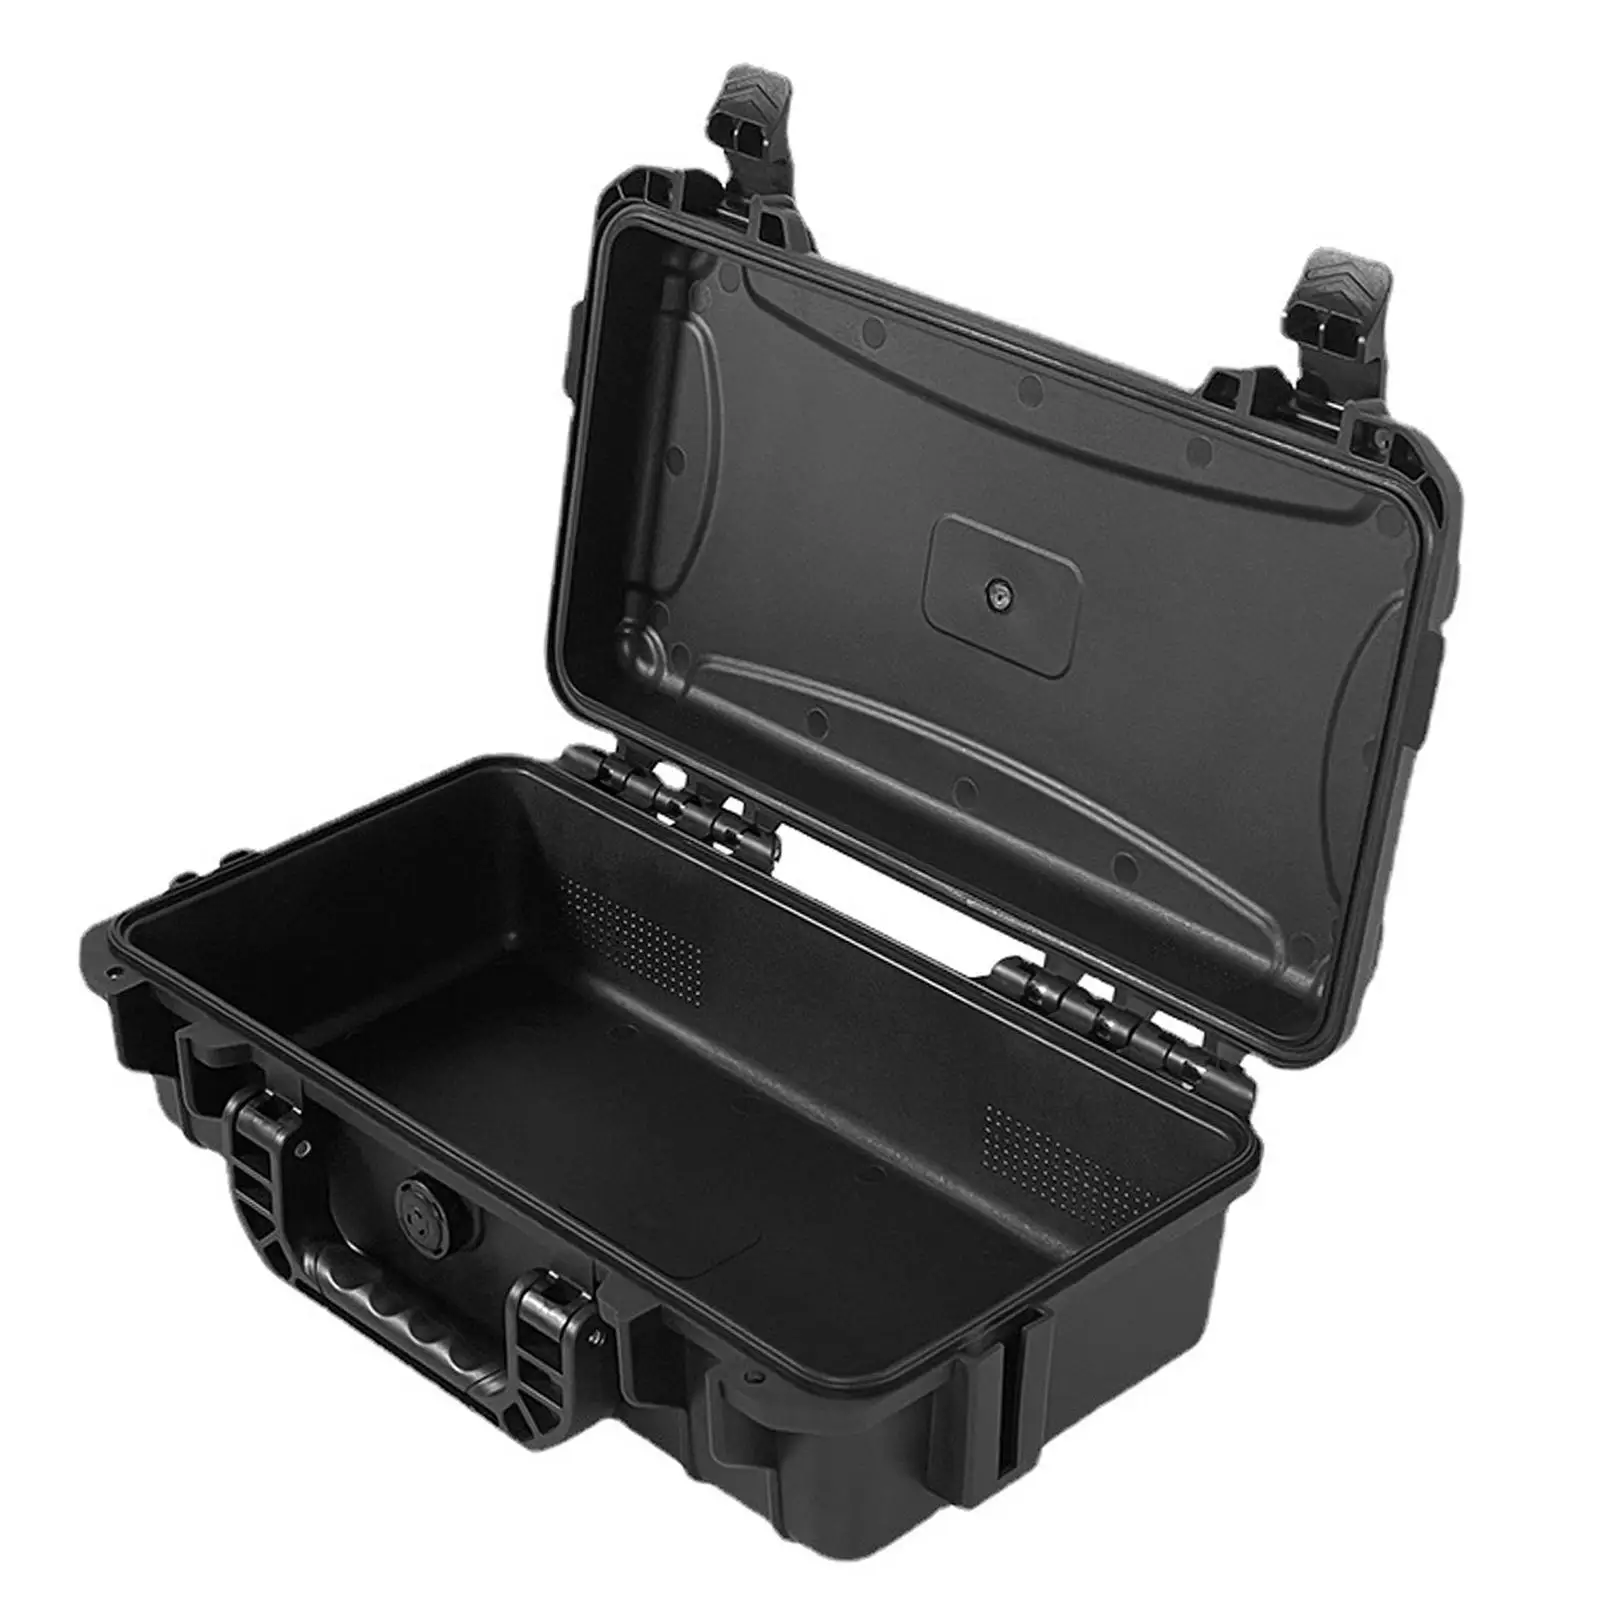 Shockproof Outdoor Storage Case carry tools Case Shatterproof Sealed Box for Photographic Equipment Transportation Home